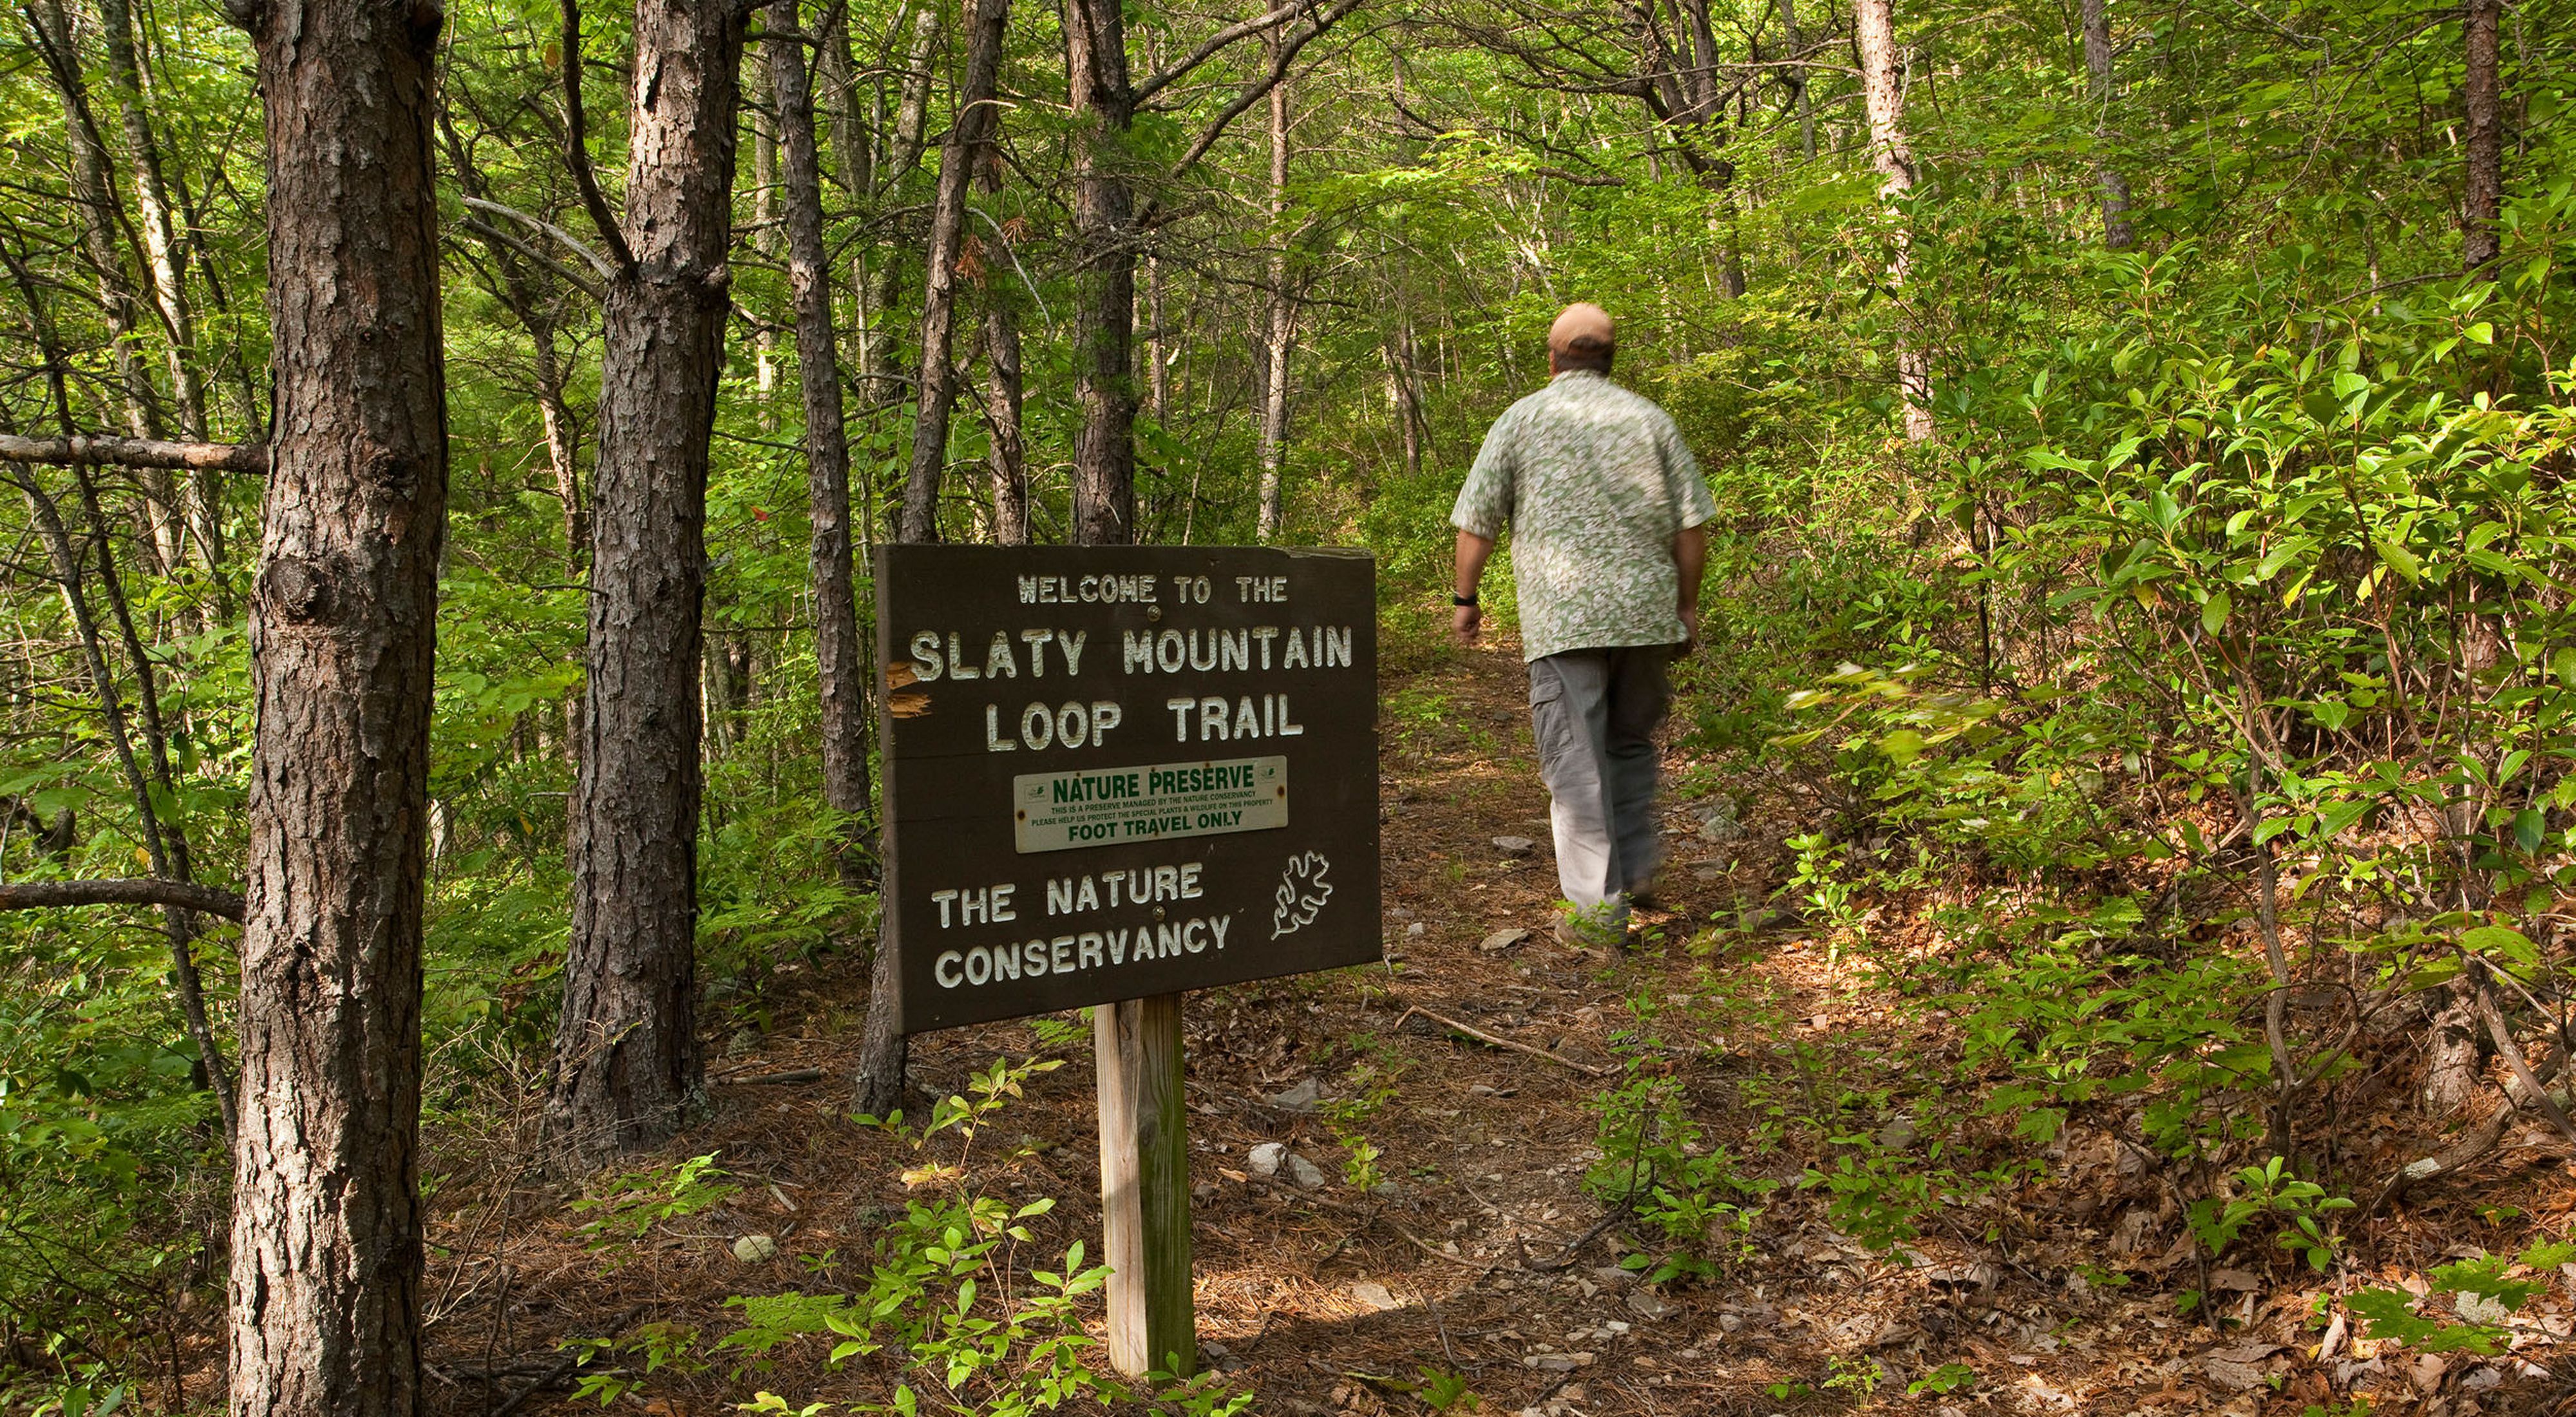 A hiker walks along a trail in a densely wooded forest.